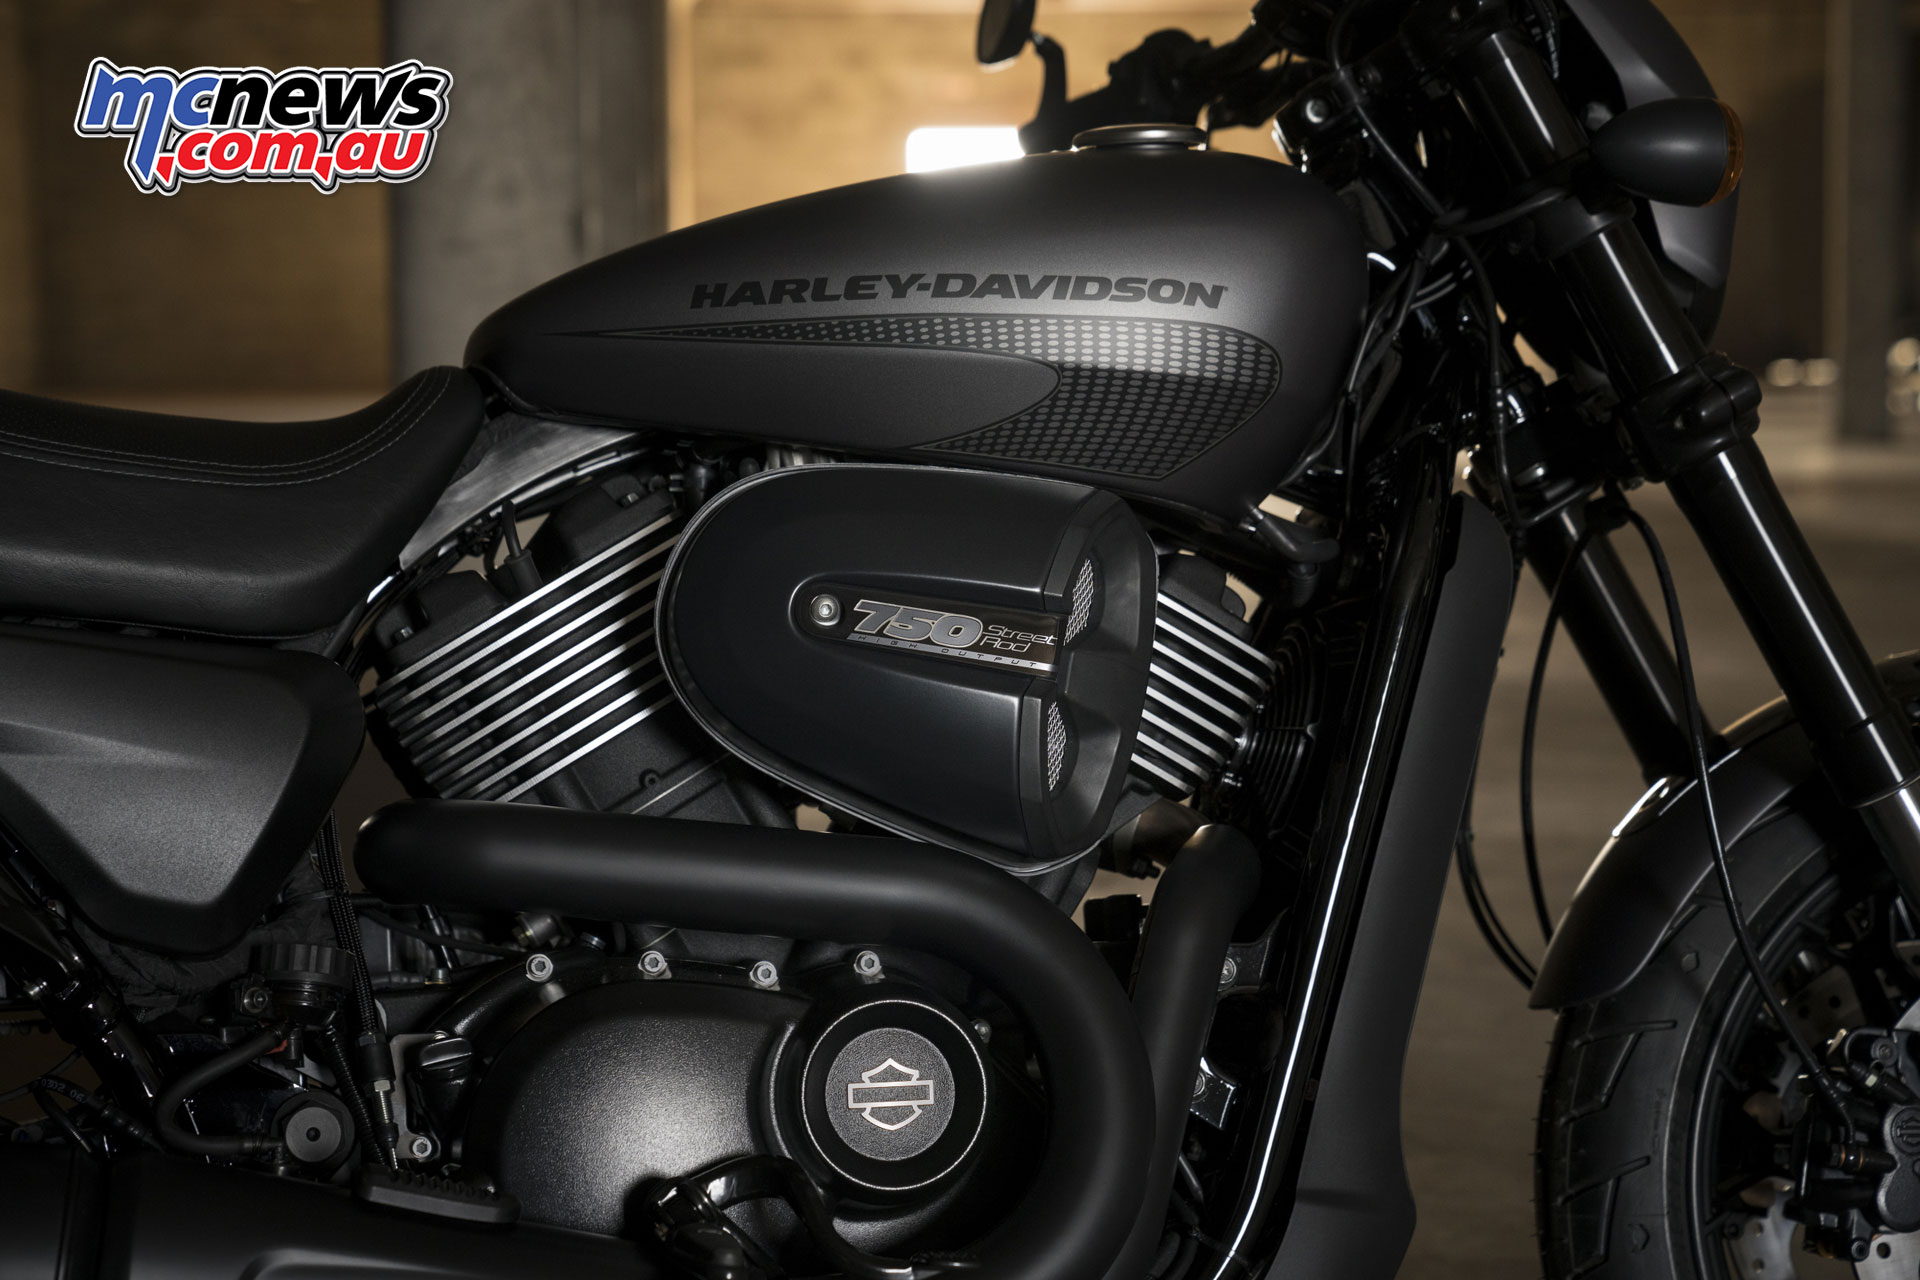 New Harley Street Rod Spawned From Street 750 Mcnews